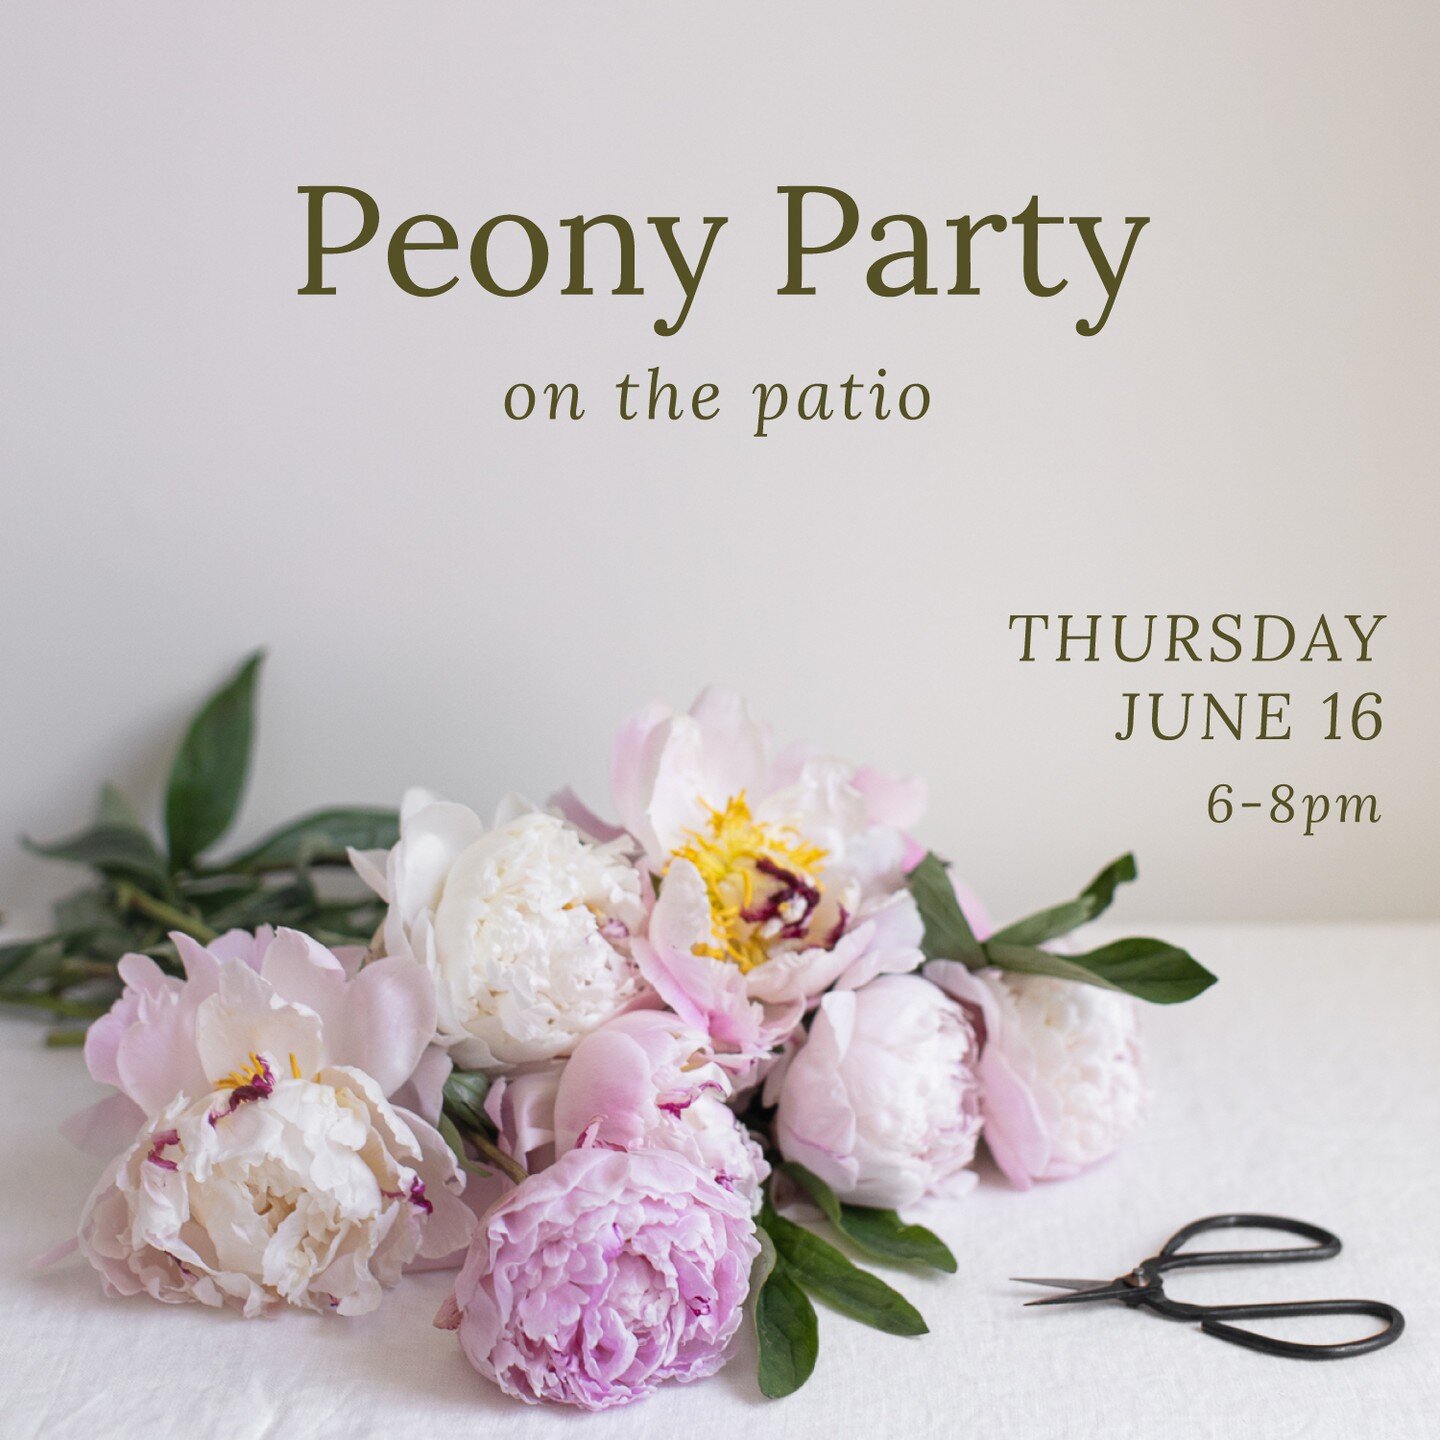 Create a fresh floral design with peonies, roses &amp; greens. Create notecards/gift tags using a technique called flower pounding. Follow the link in our bio to buy your ticket!